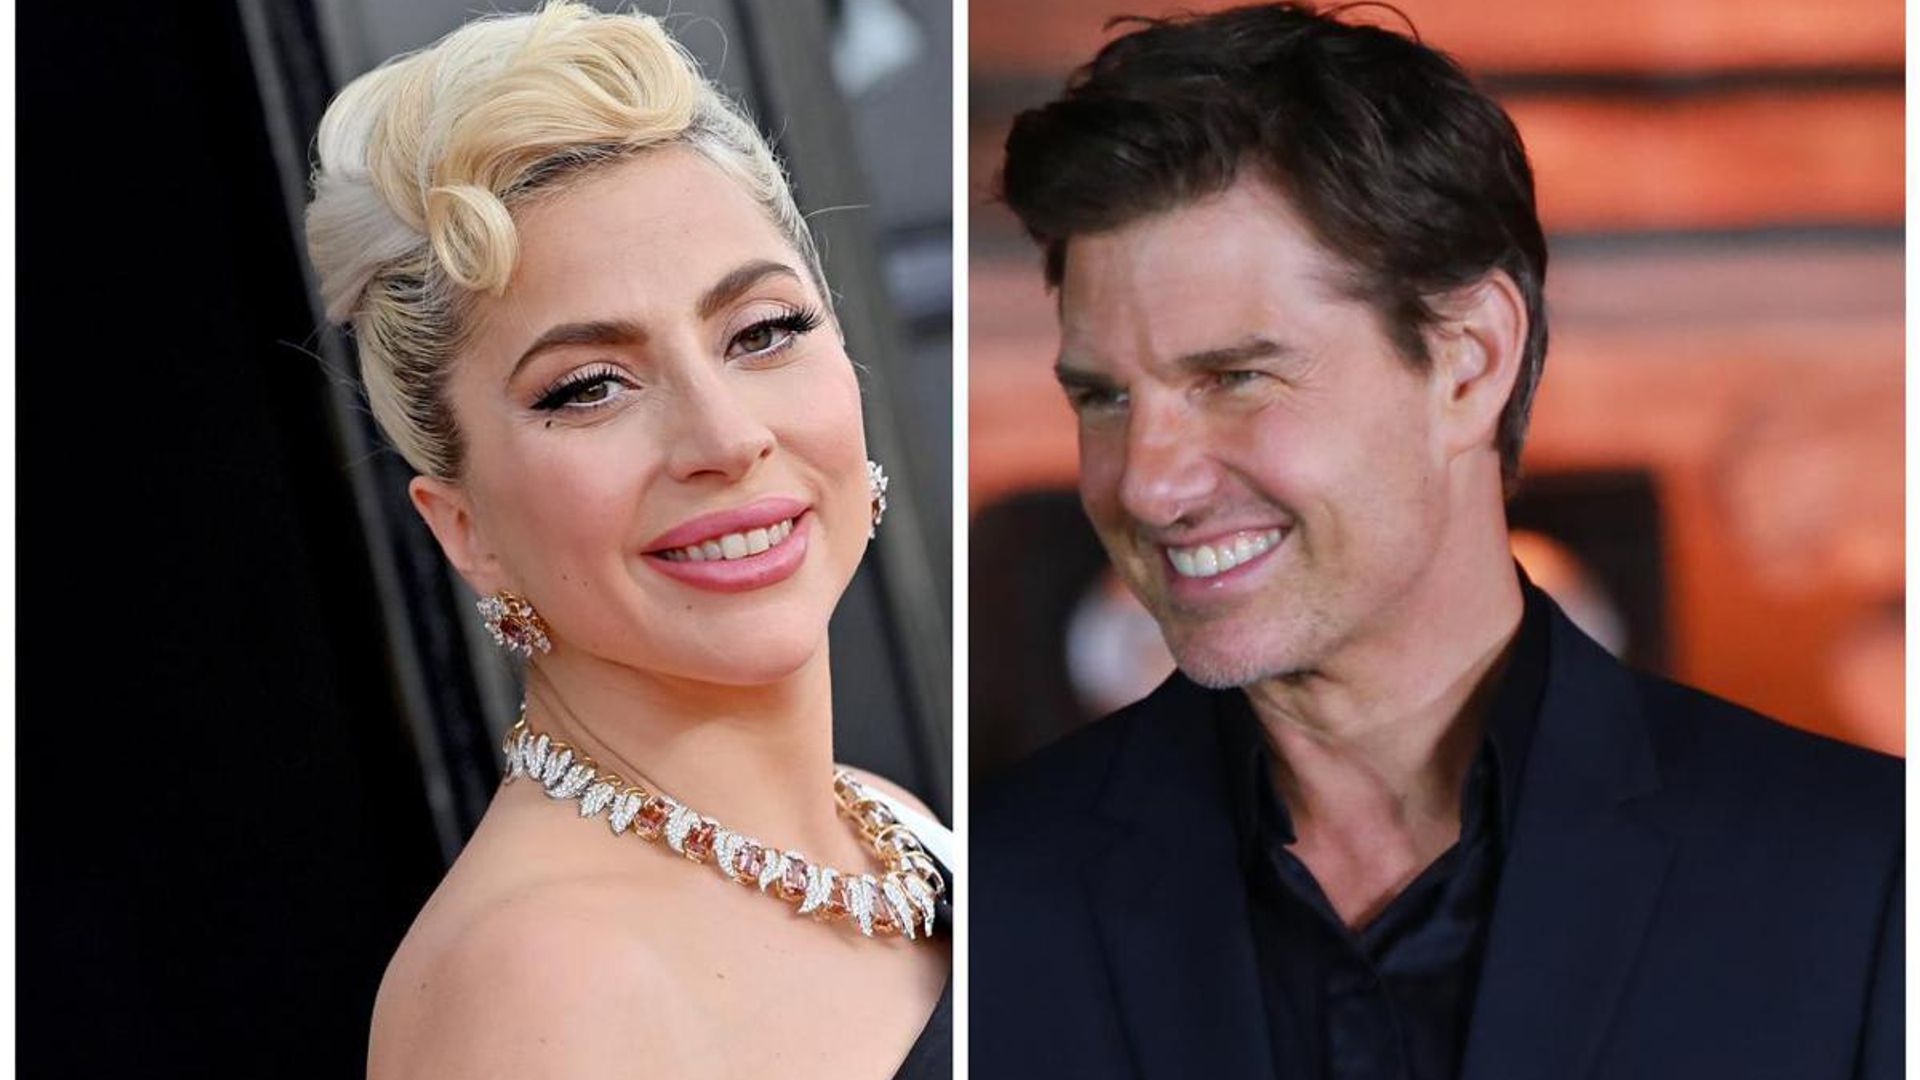 Lady Gaga shows love for Tom Cruise with a kiss on the cheek at Las Vegas show